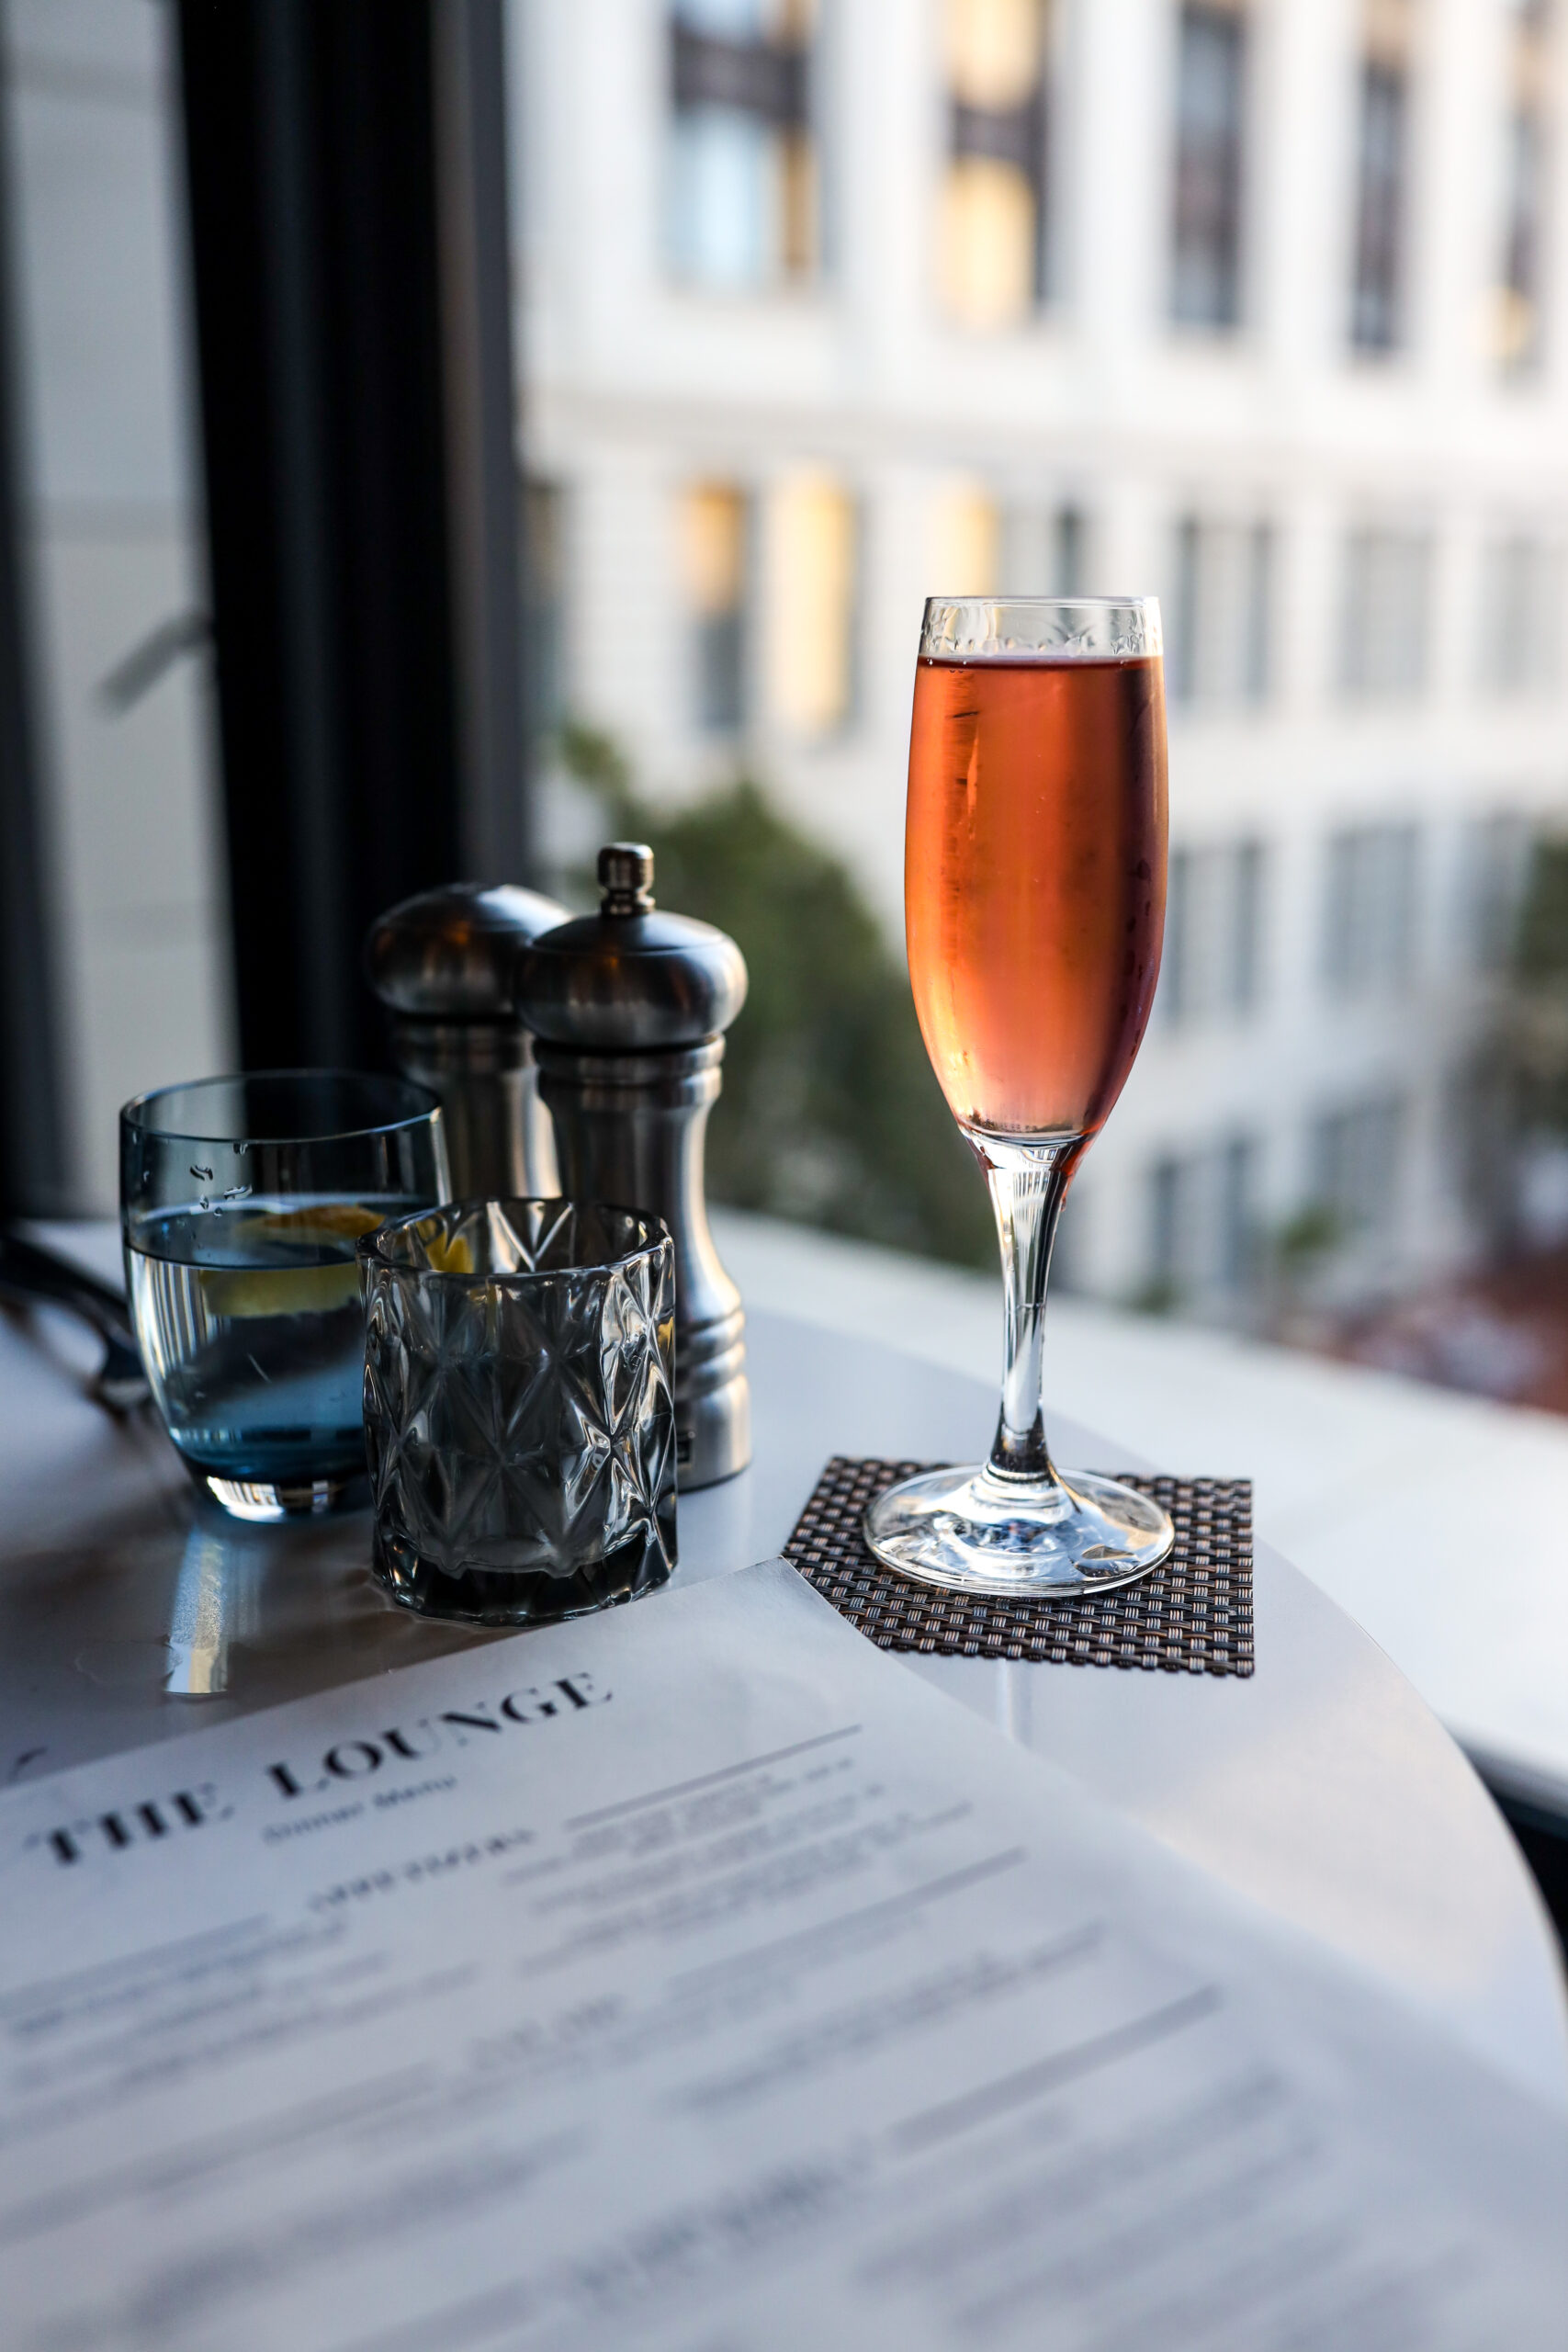 The Ritz-Carlton, San Francisco The Lounge, champagne flute with JCB rose. Menu, View of courtyard